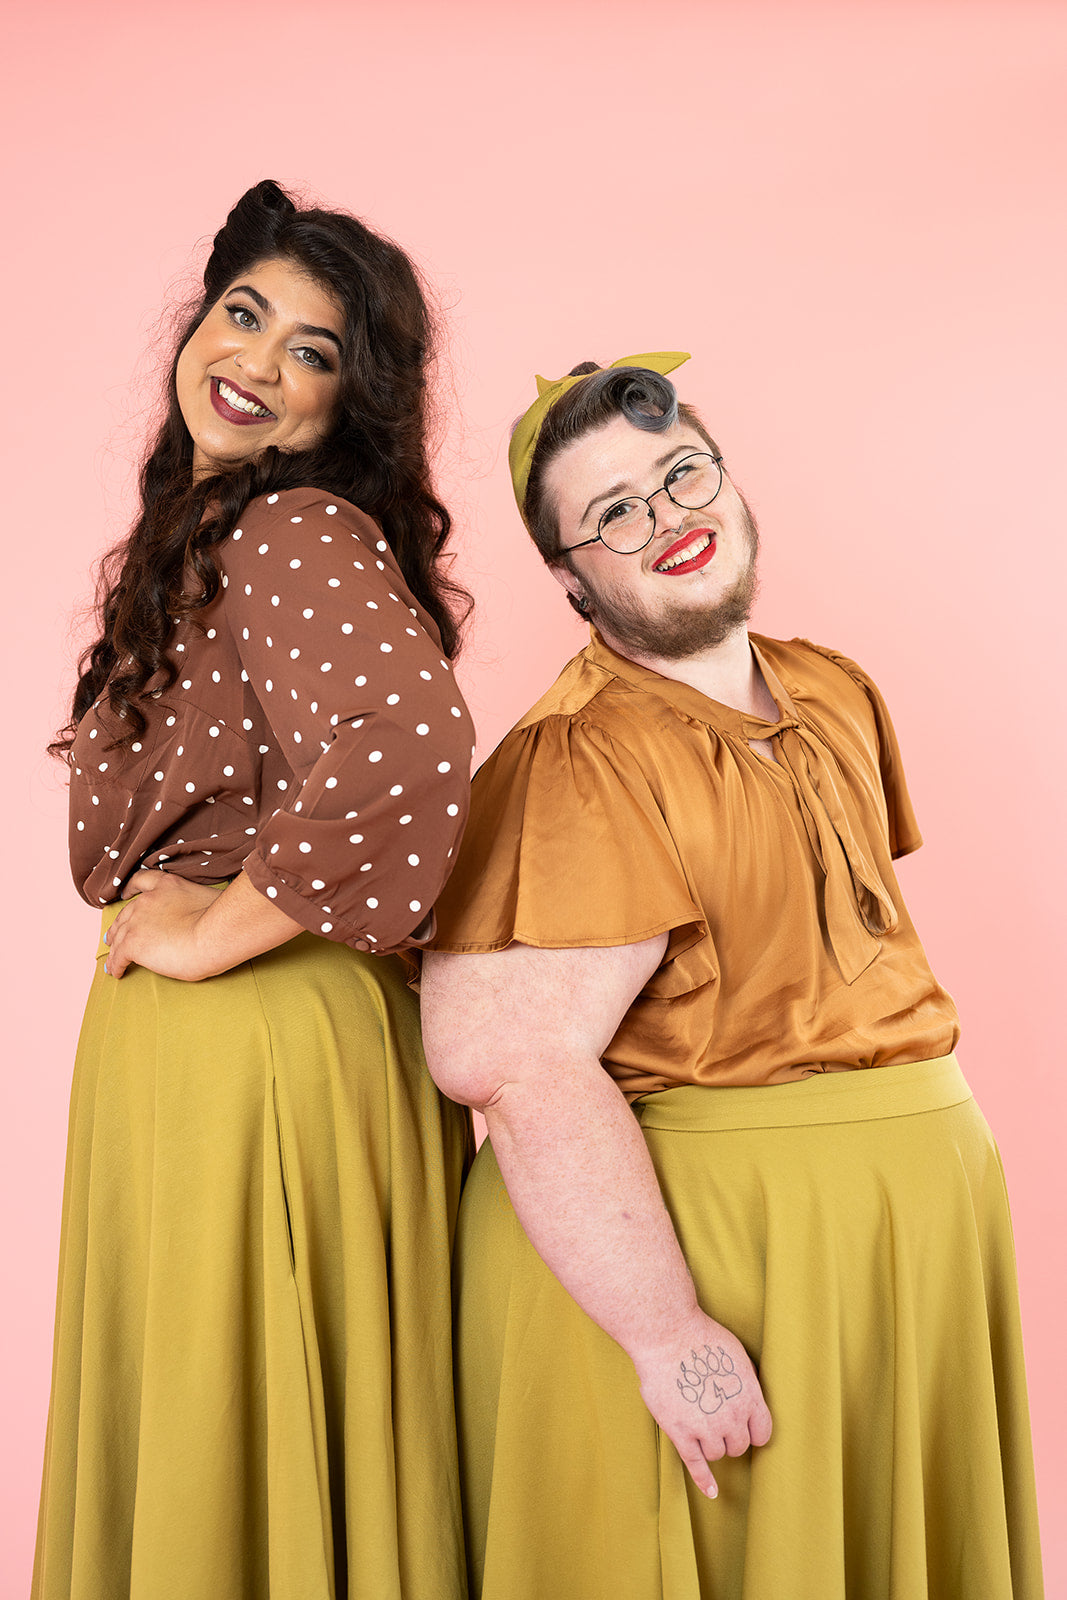 Photo of two people standing back to back and wearing mustard colour shirts. One is a woman with long brown hair and is wearing a brown shirt. The other person is wearing a bronze silk shirt and has facial hair and red lipstick